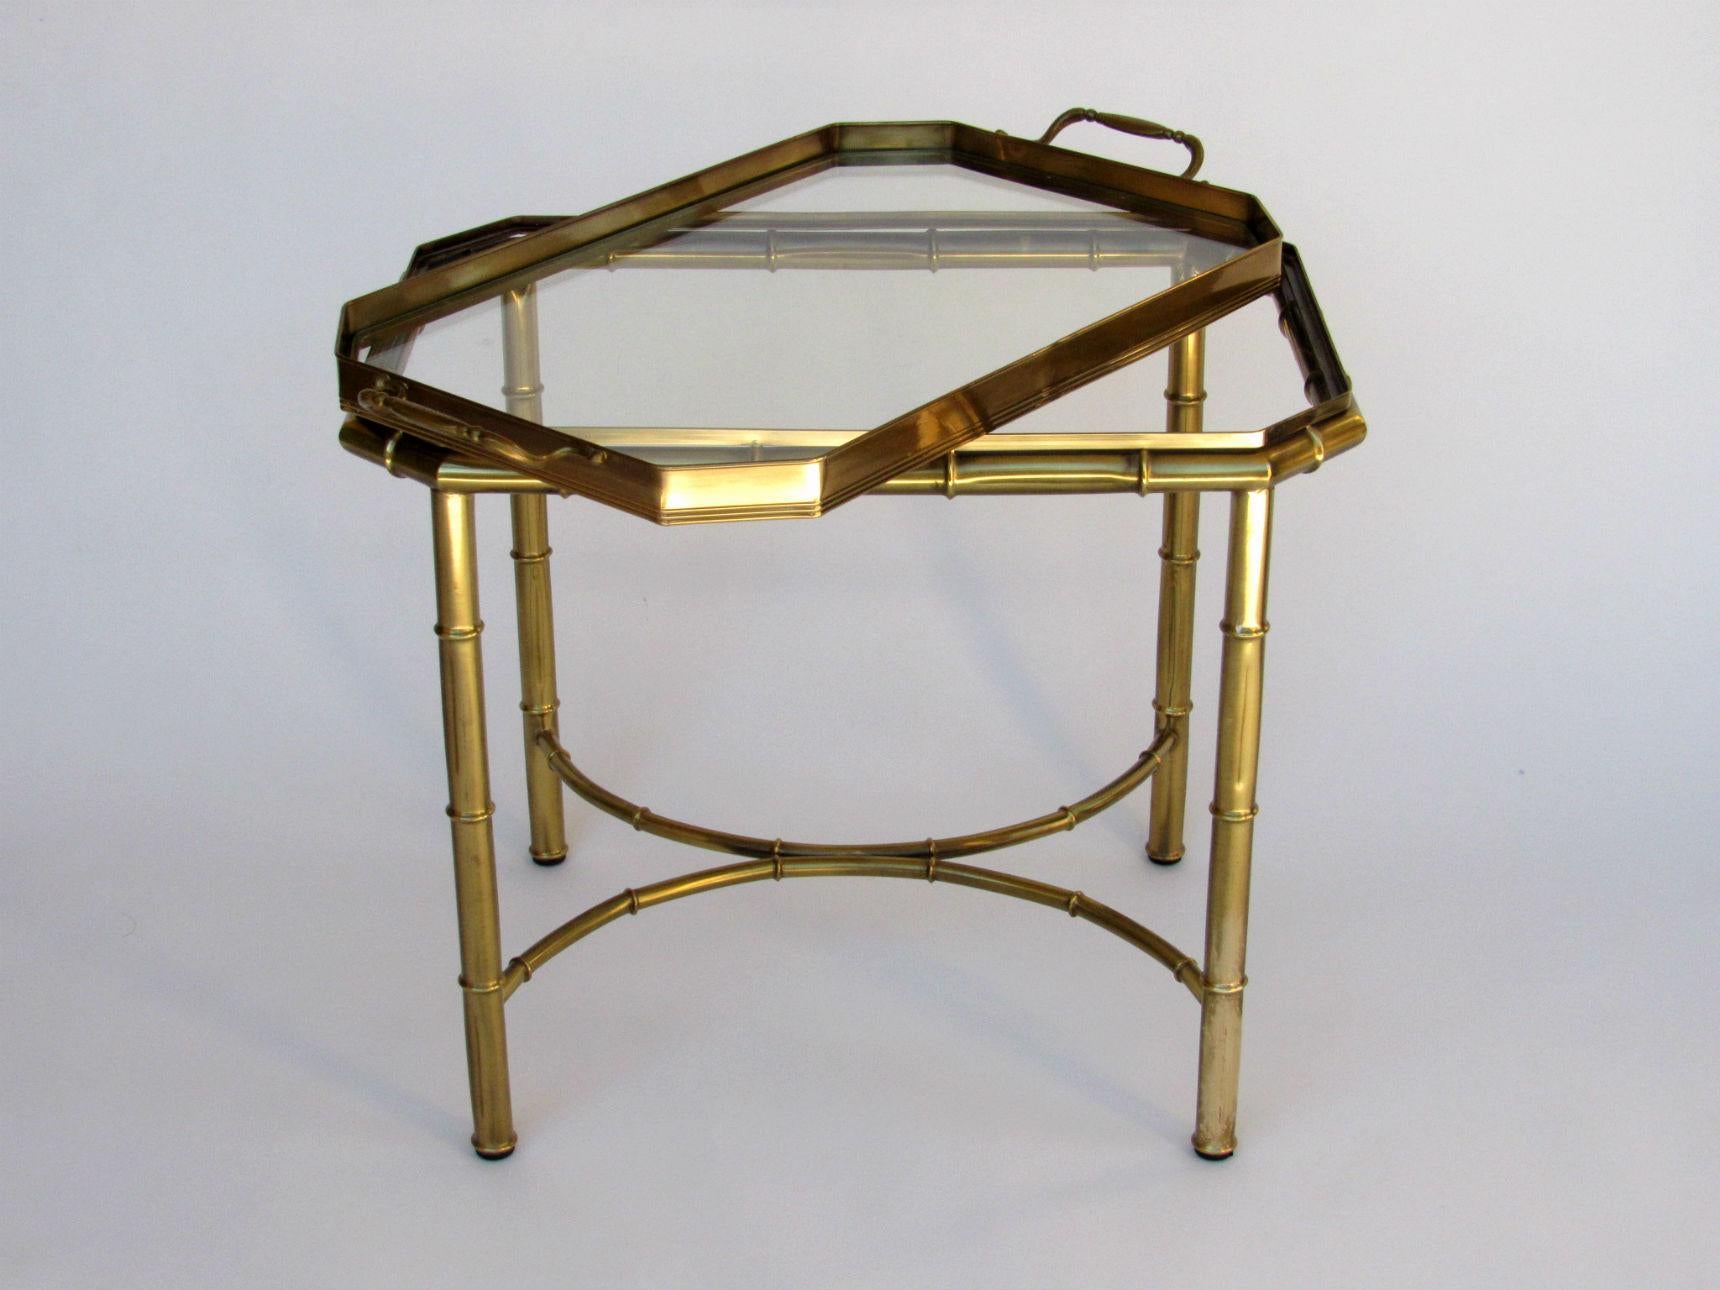 Mastercraft Faux Bamboo Tray Table in Antique Brass, USA, 1960-70s.  This stylish Mastercraft  table has a removable tray top that make serving an ease.  In very good original condition with a lovely patina.

